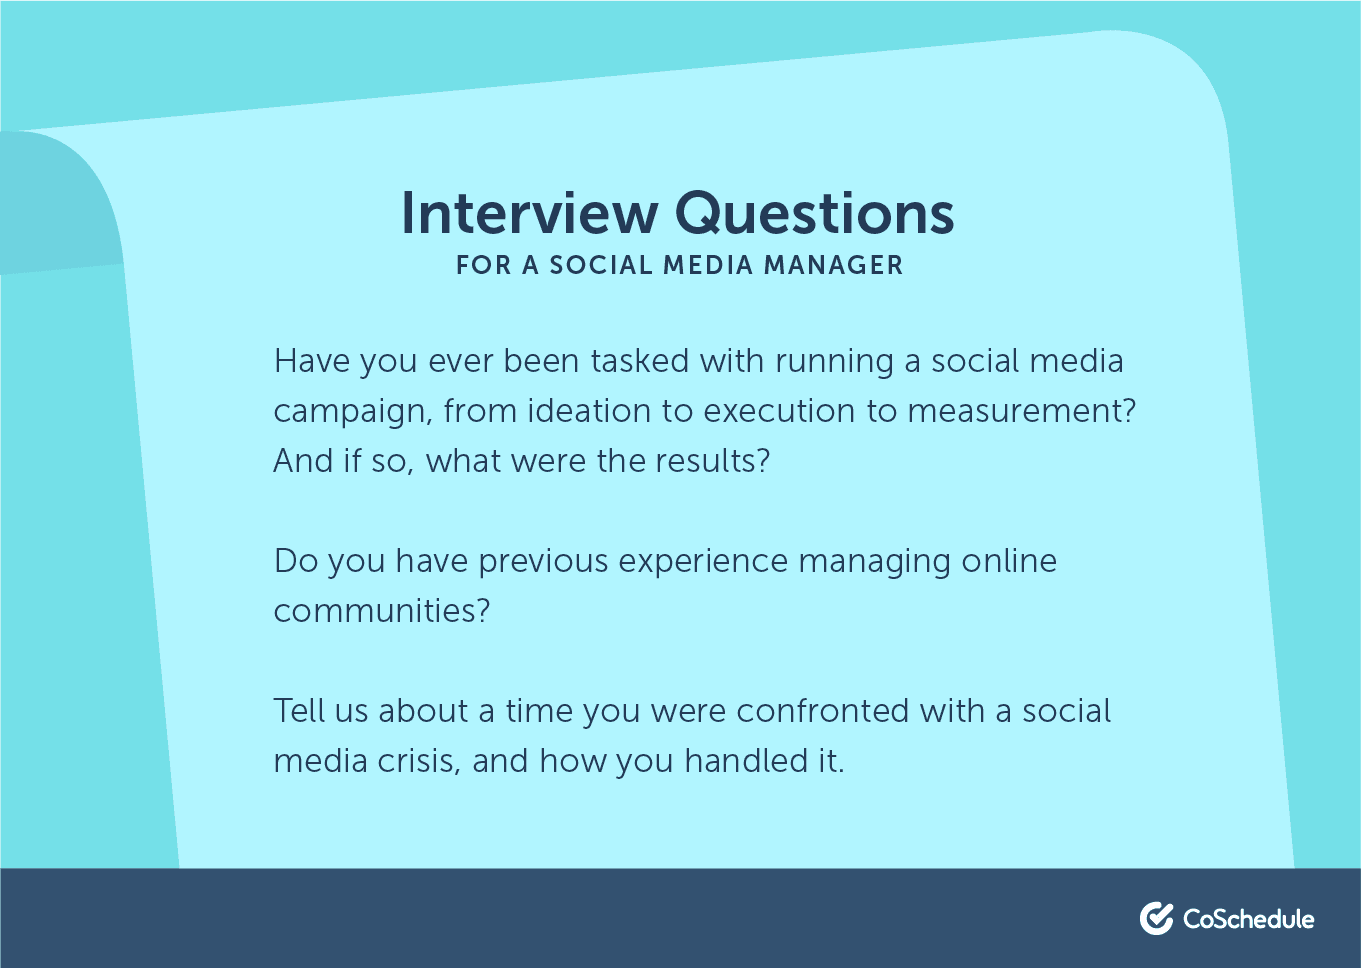 Interview questions for a social media manager position